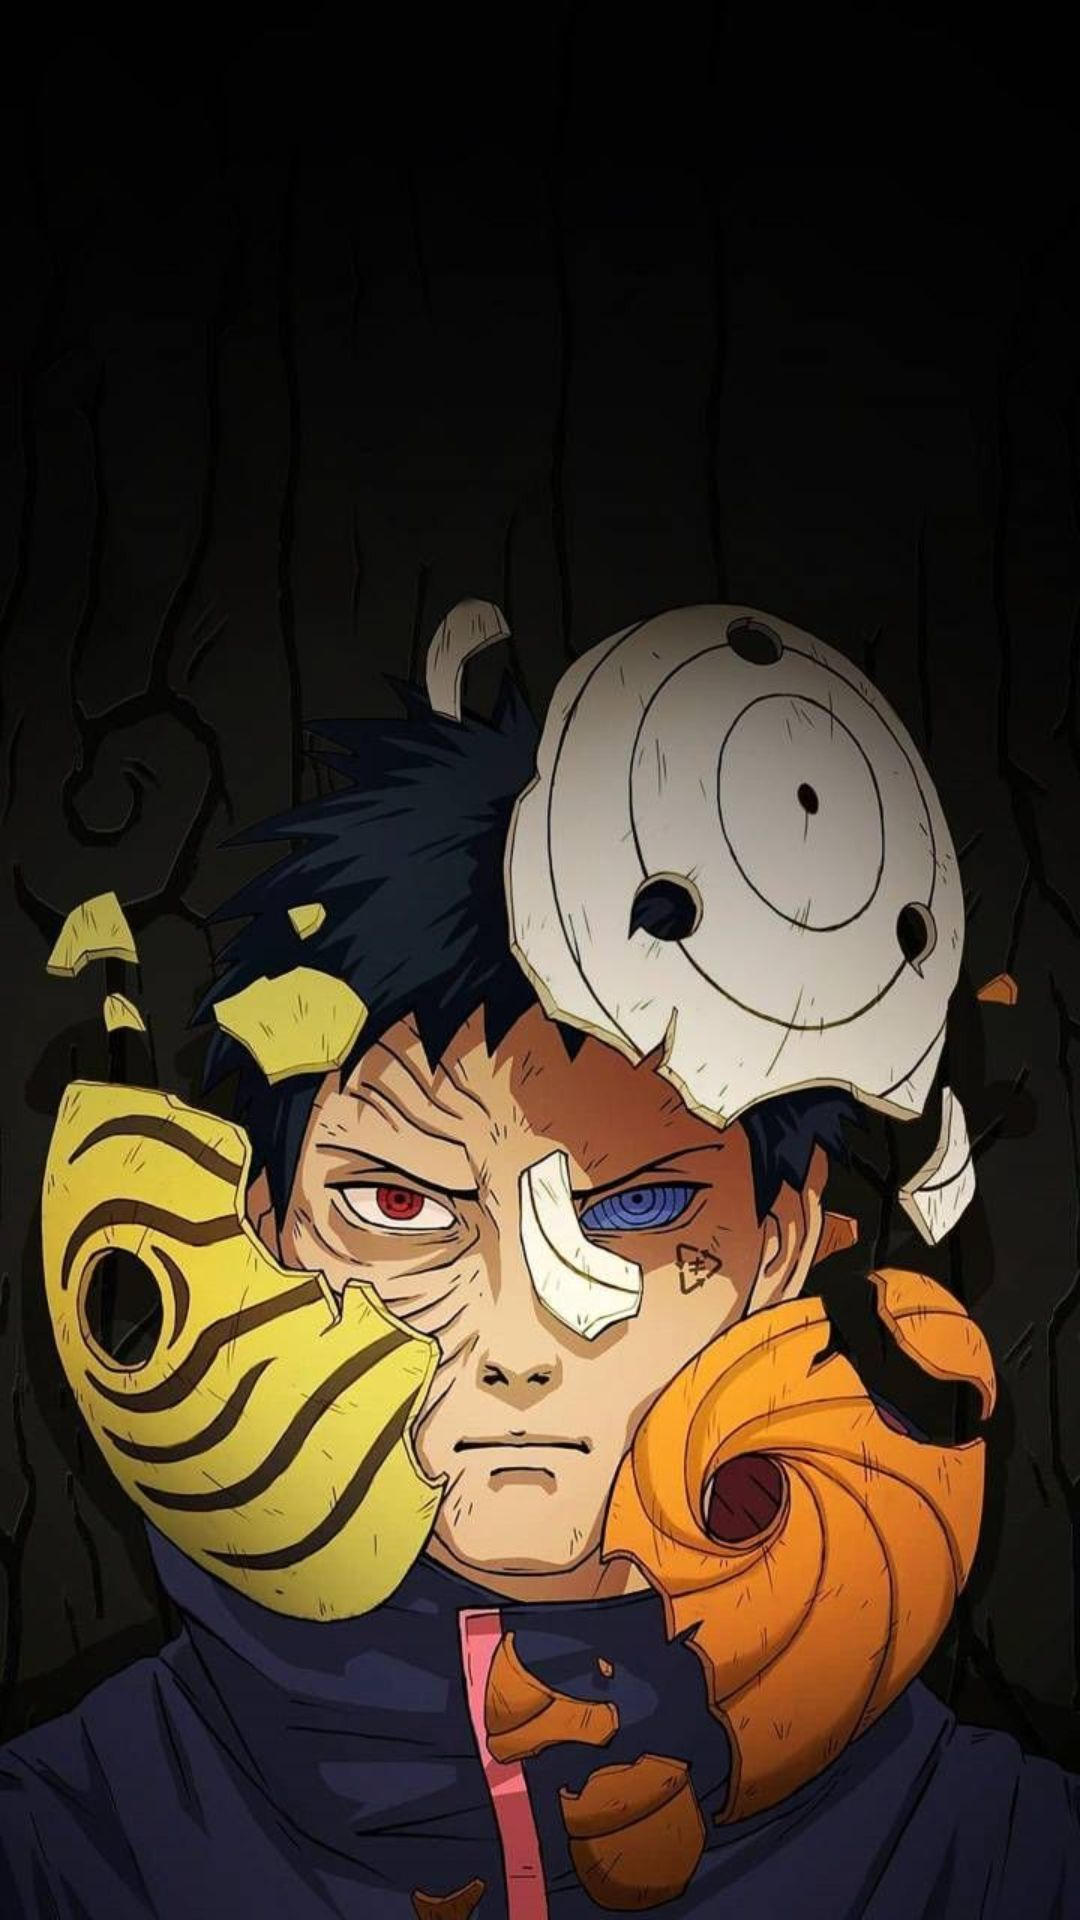 1080x1920 Obito HD Wallpaper- Top Best Quality Obito HD Backgrounds (HD,4k